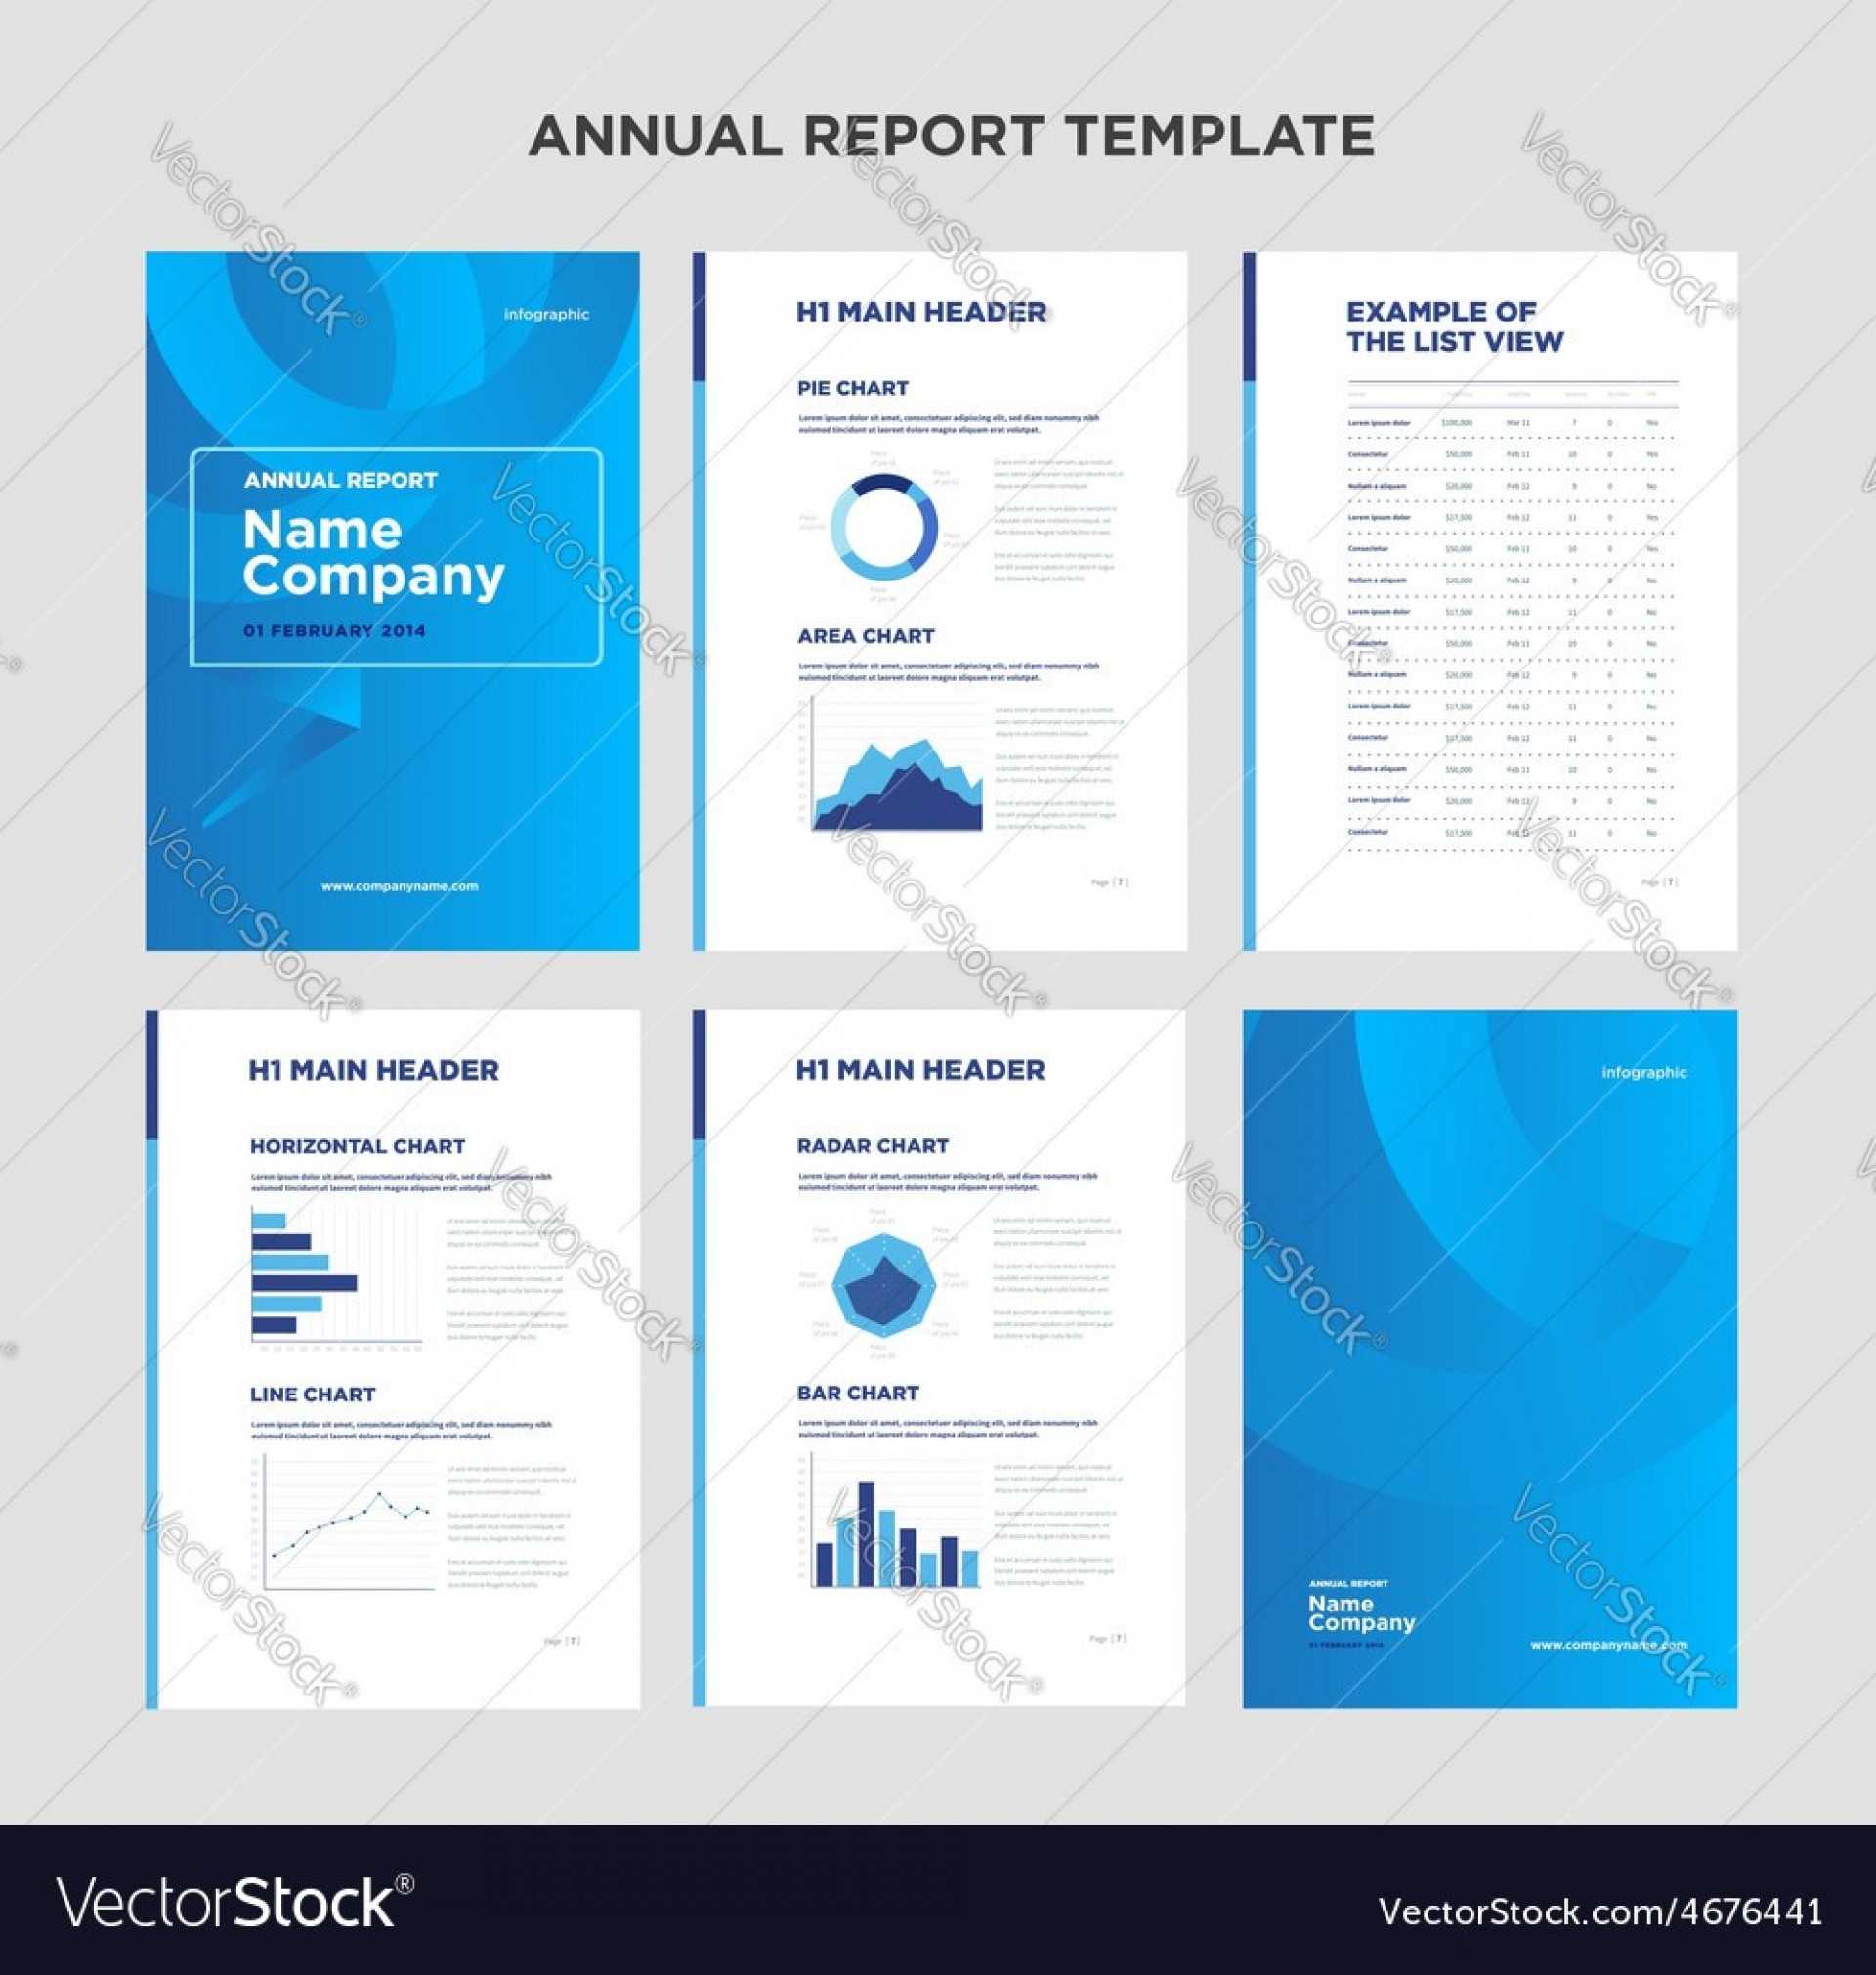 022 Template Ideas Annual Report Word Ngo Marvelous With Regard To Word Annual Report Template